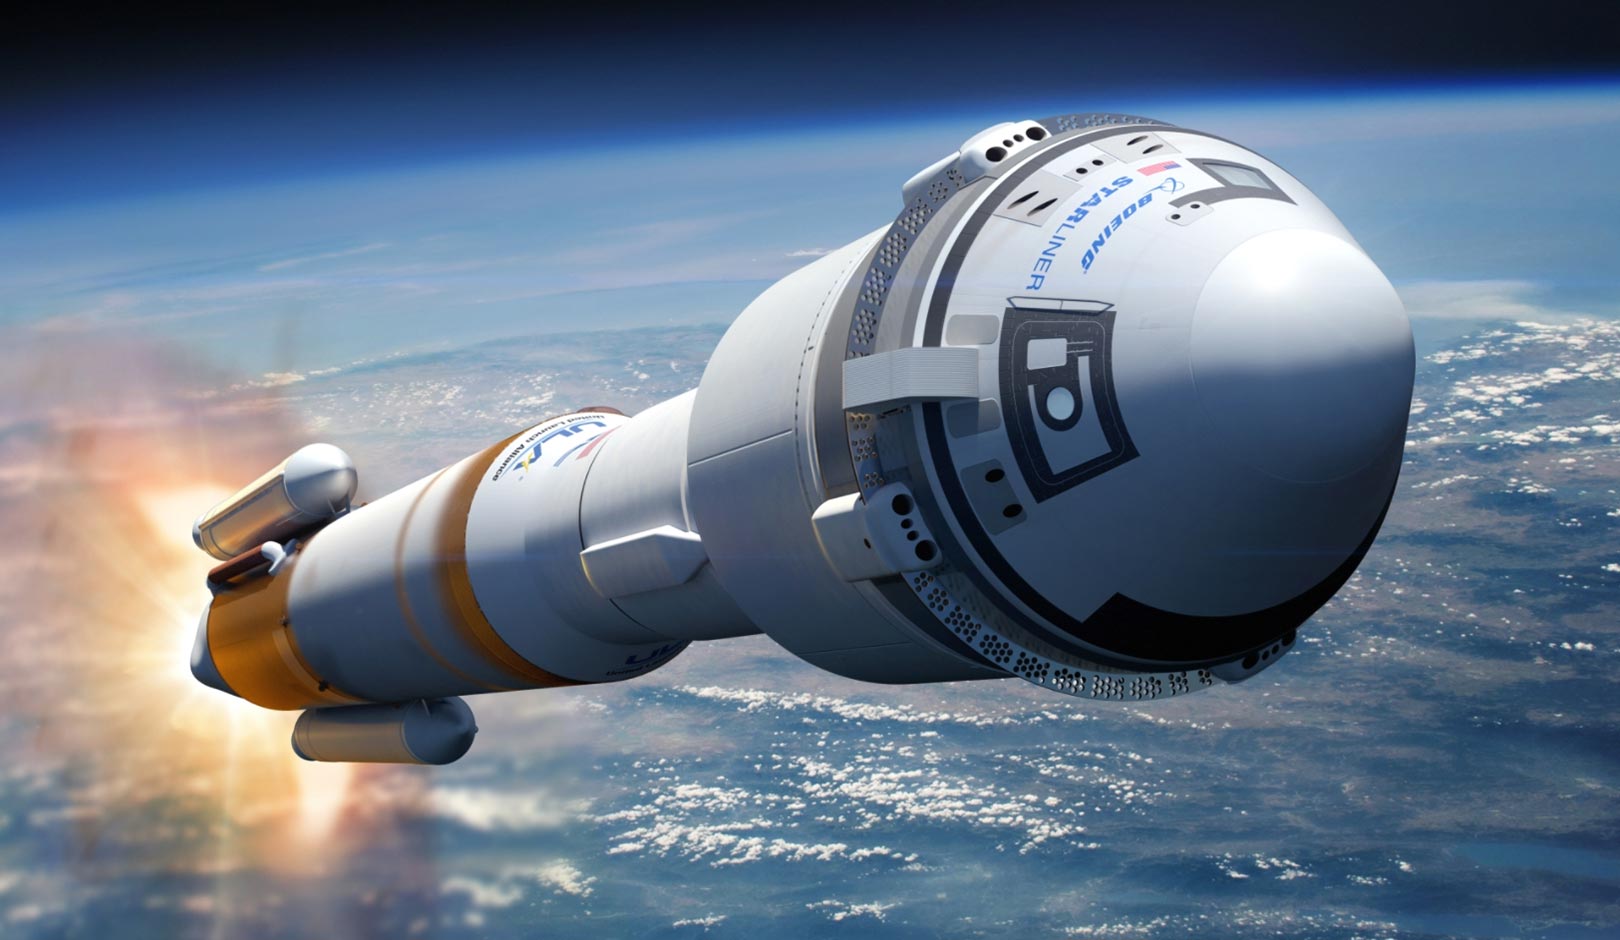 Boeing Starliner Nears Launch As ISS Astronauts Work on Space Botany and Human Research